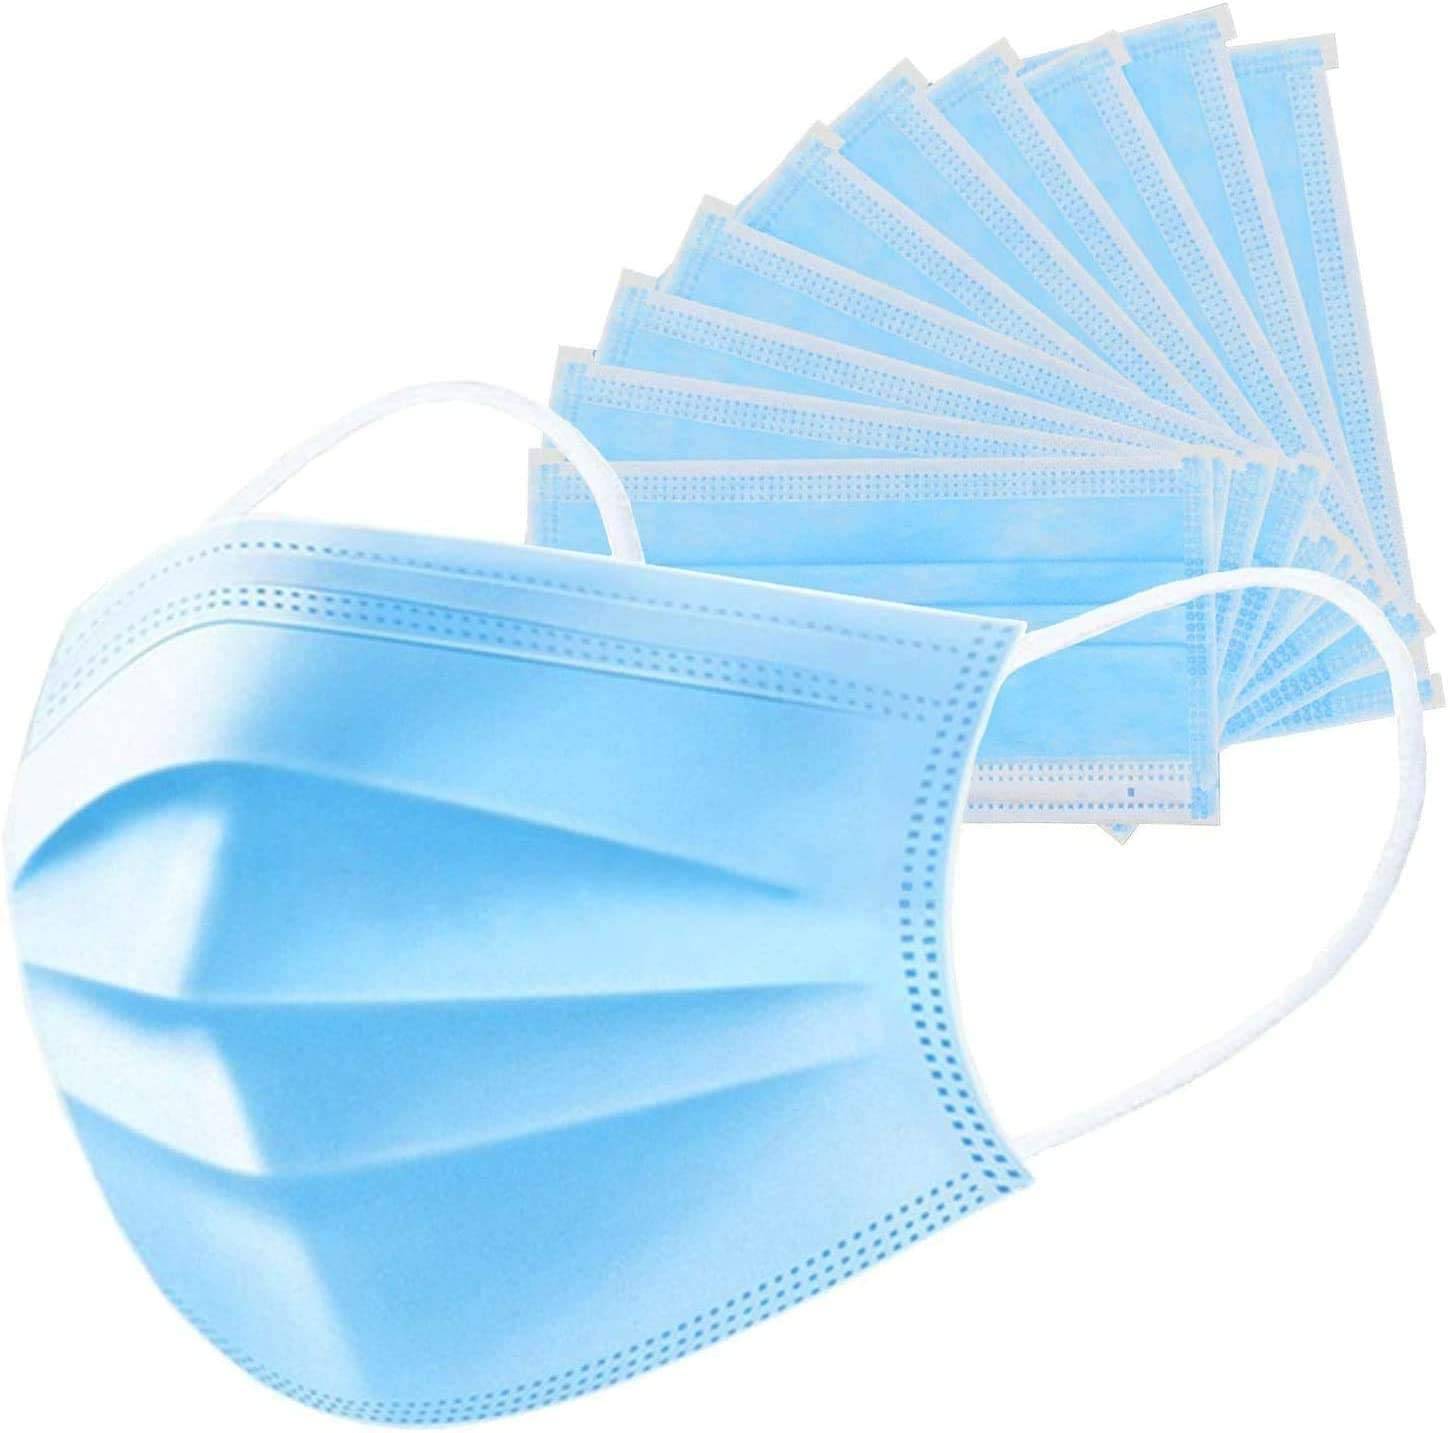 Factory Great sales Earloop 3 layer filter Anti Coronavirus mask non-woven disposable face mask pm2.5 3M respirator Featured Image